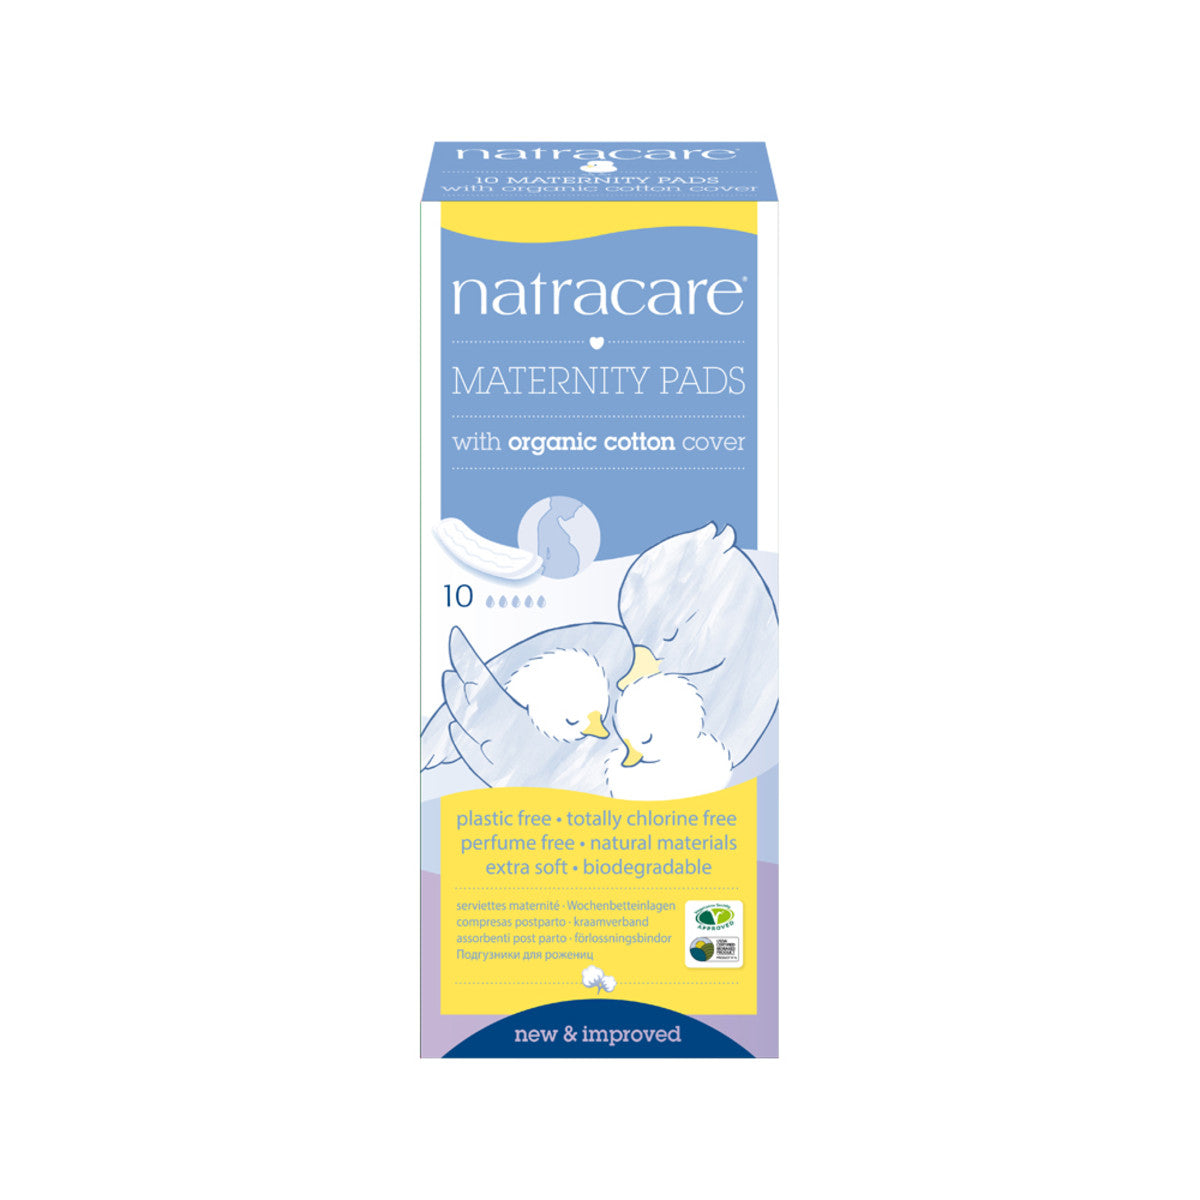 Natracare - Maternity Pads with Organic Cotton Cover